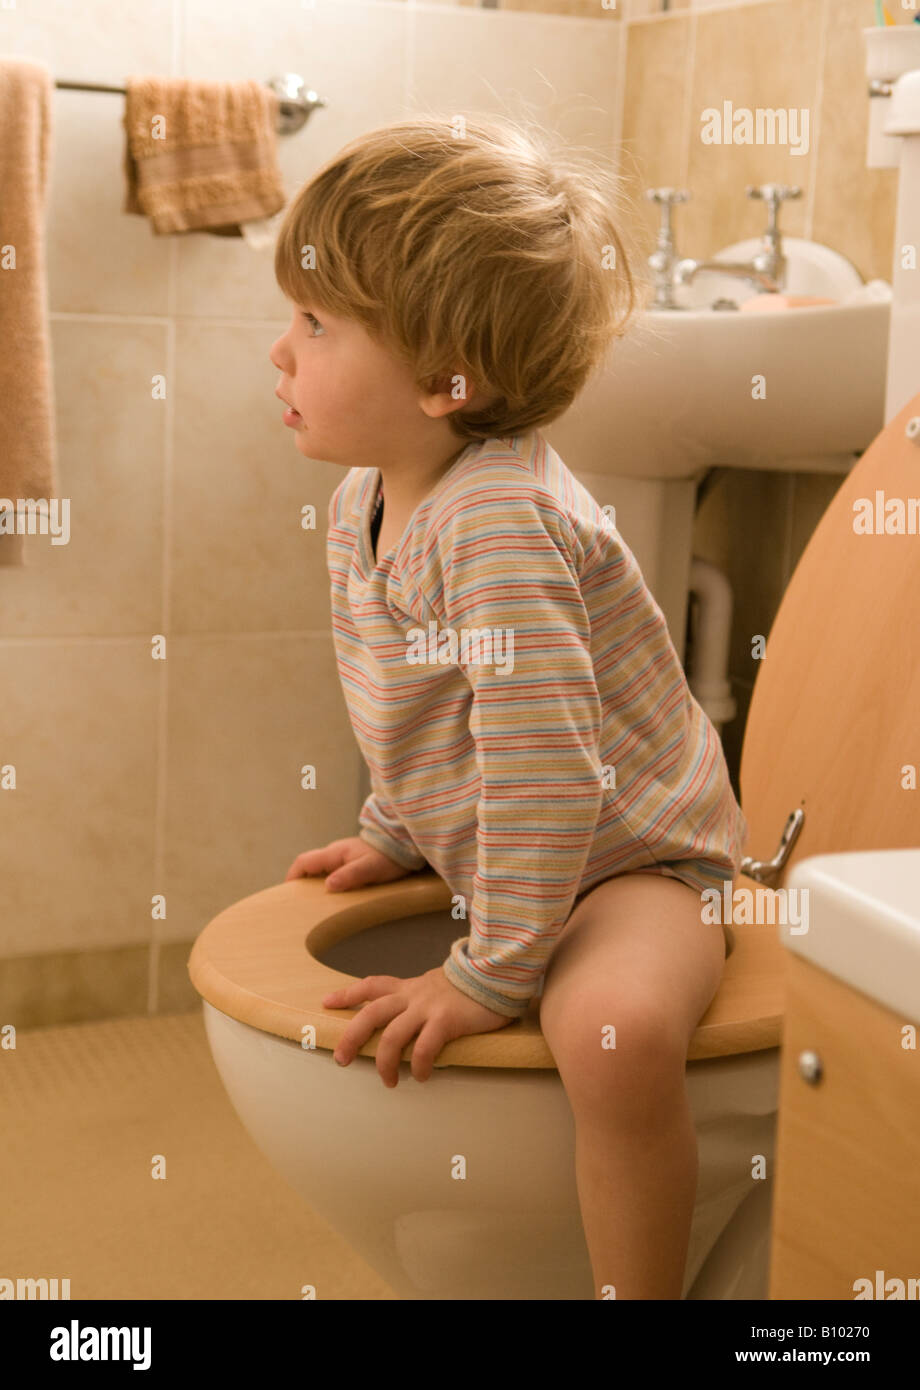 young child, boy, learning to use the toilet, loo, sitting on seat, two years old Stock Photo